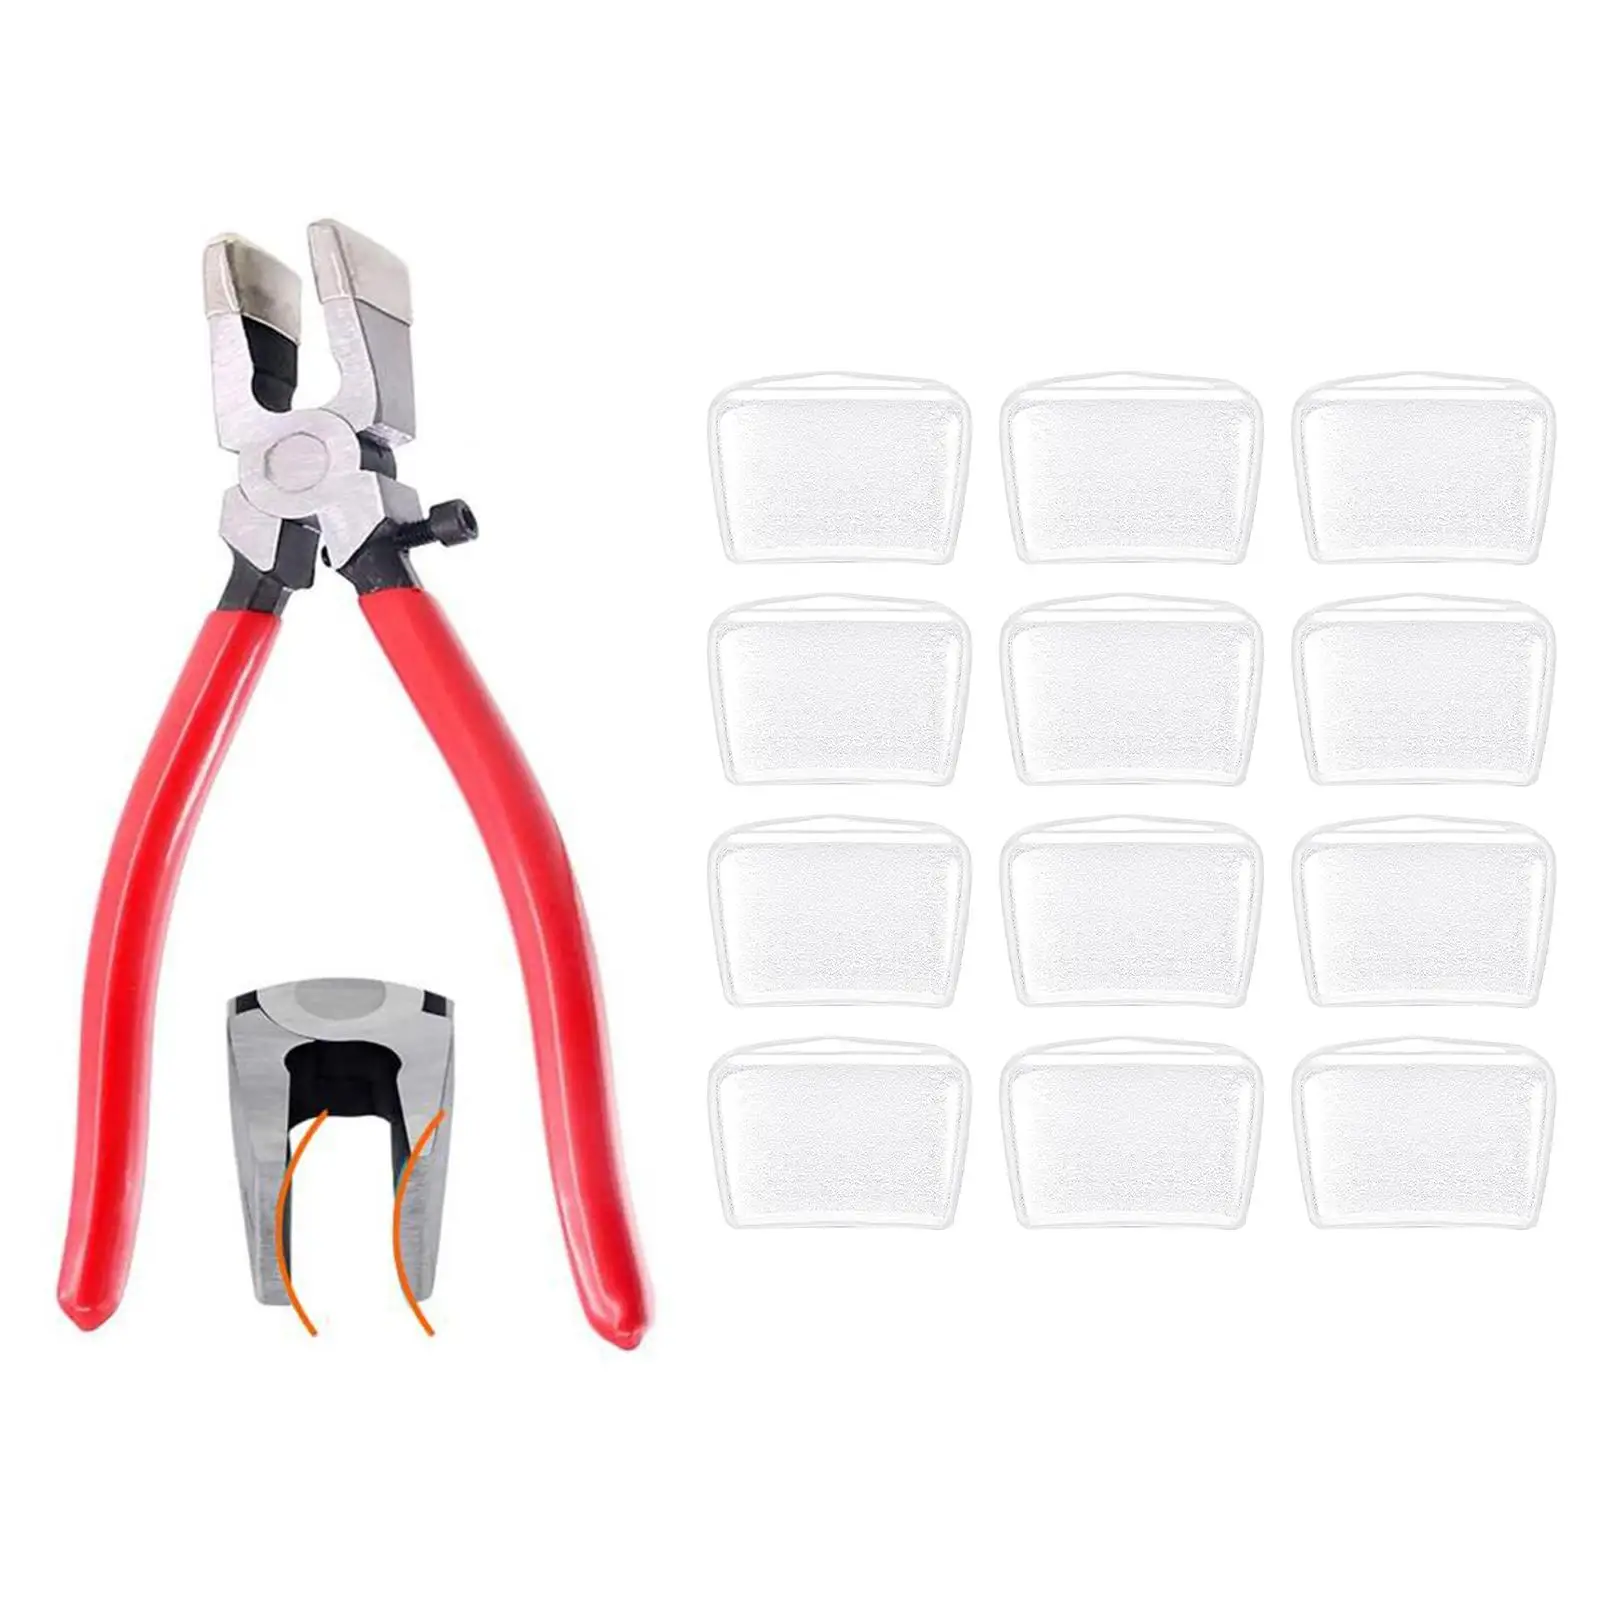 12Pcs Rubber Tips Protect Cover for Glass Breaking Pliers Glass Cutter Tool